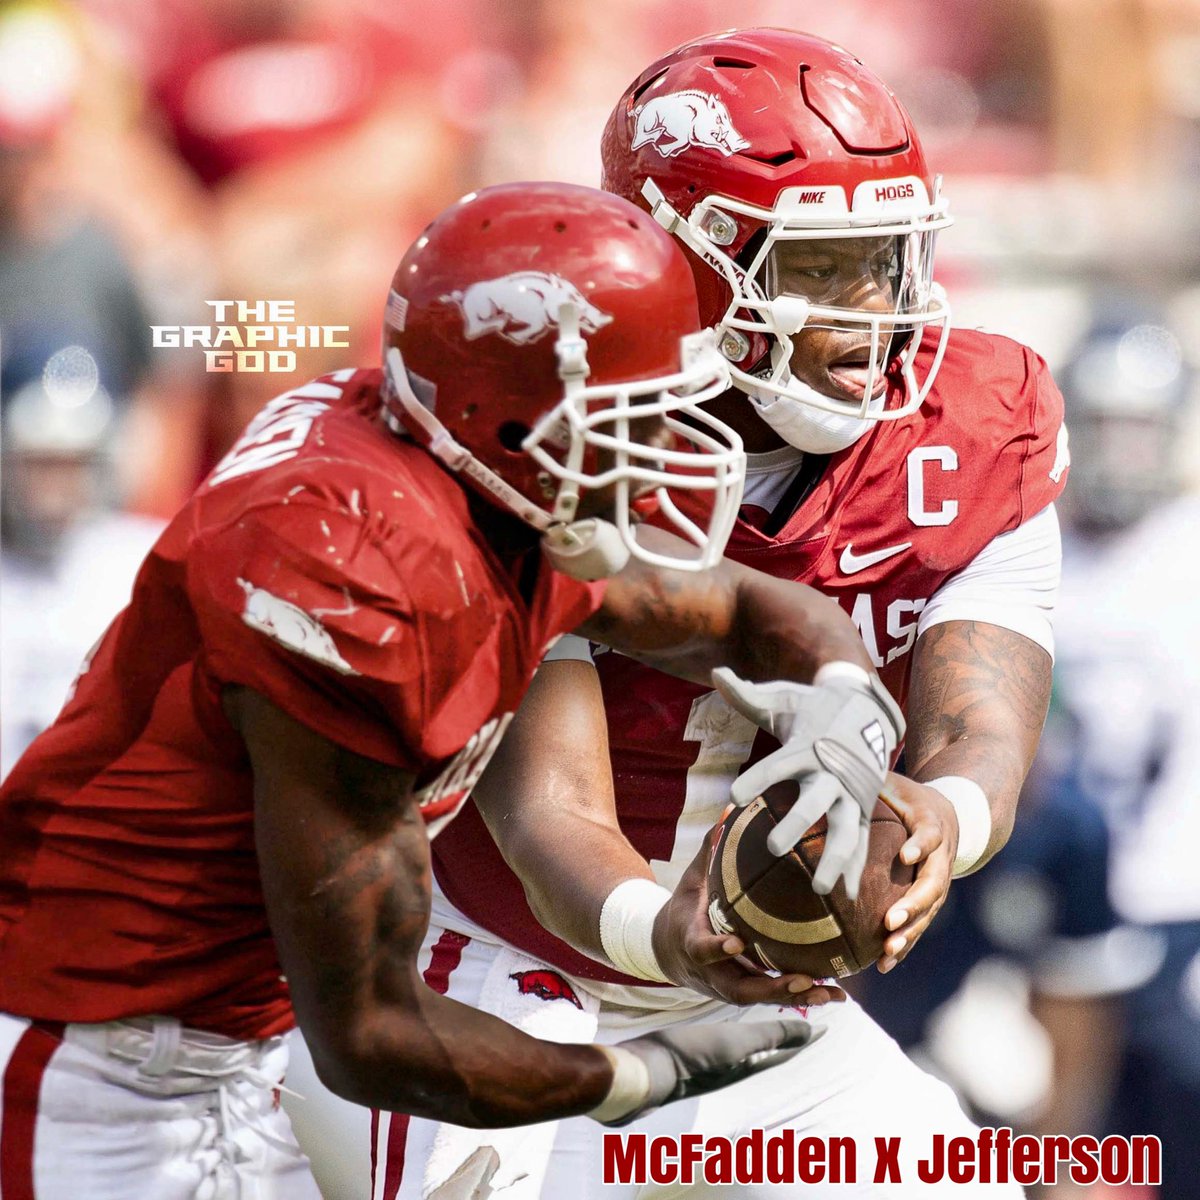 Where would this duo rank all-time in CFB? @dmcfadden20 x @kj_jefferson2 #Arkansas #CollegeFootball #WPS